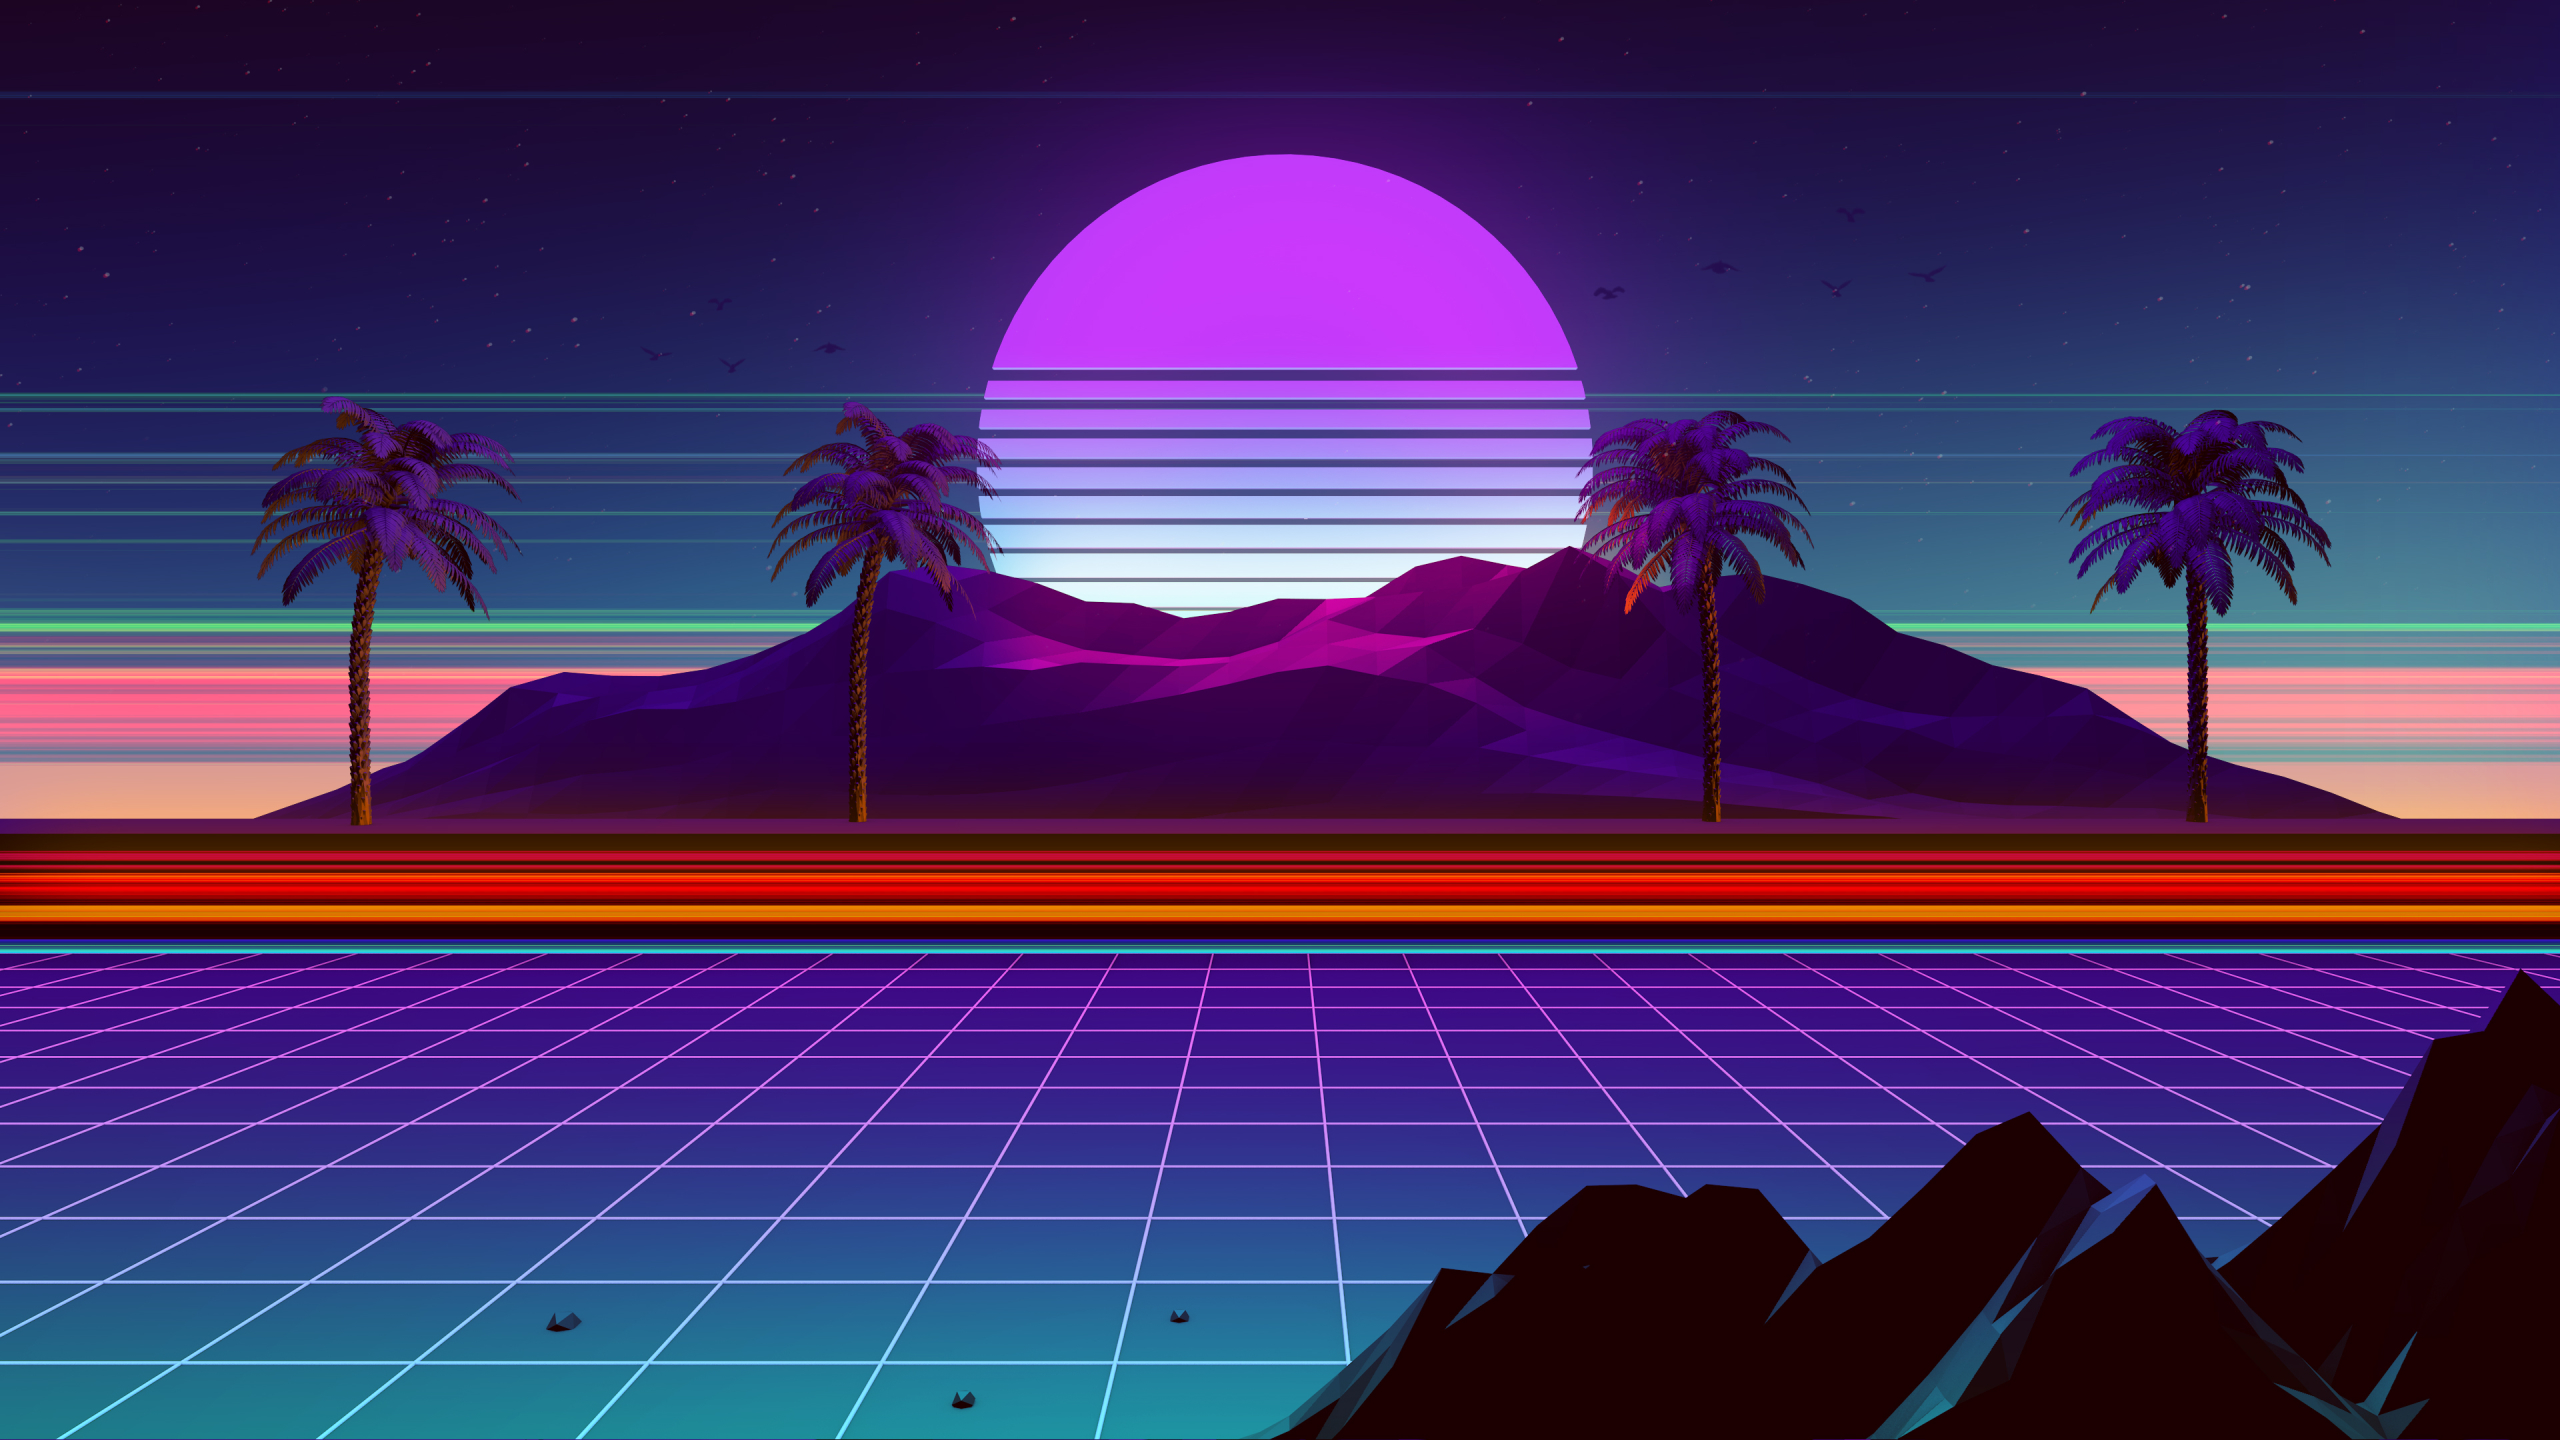 Synthwave And Retrowave 1440p Resolution Wallpaper HD